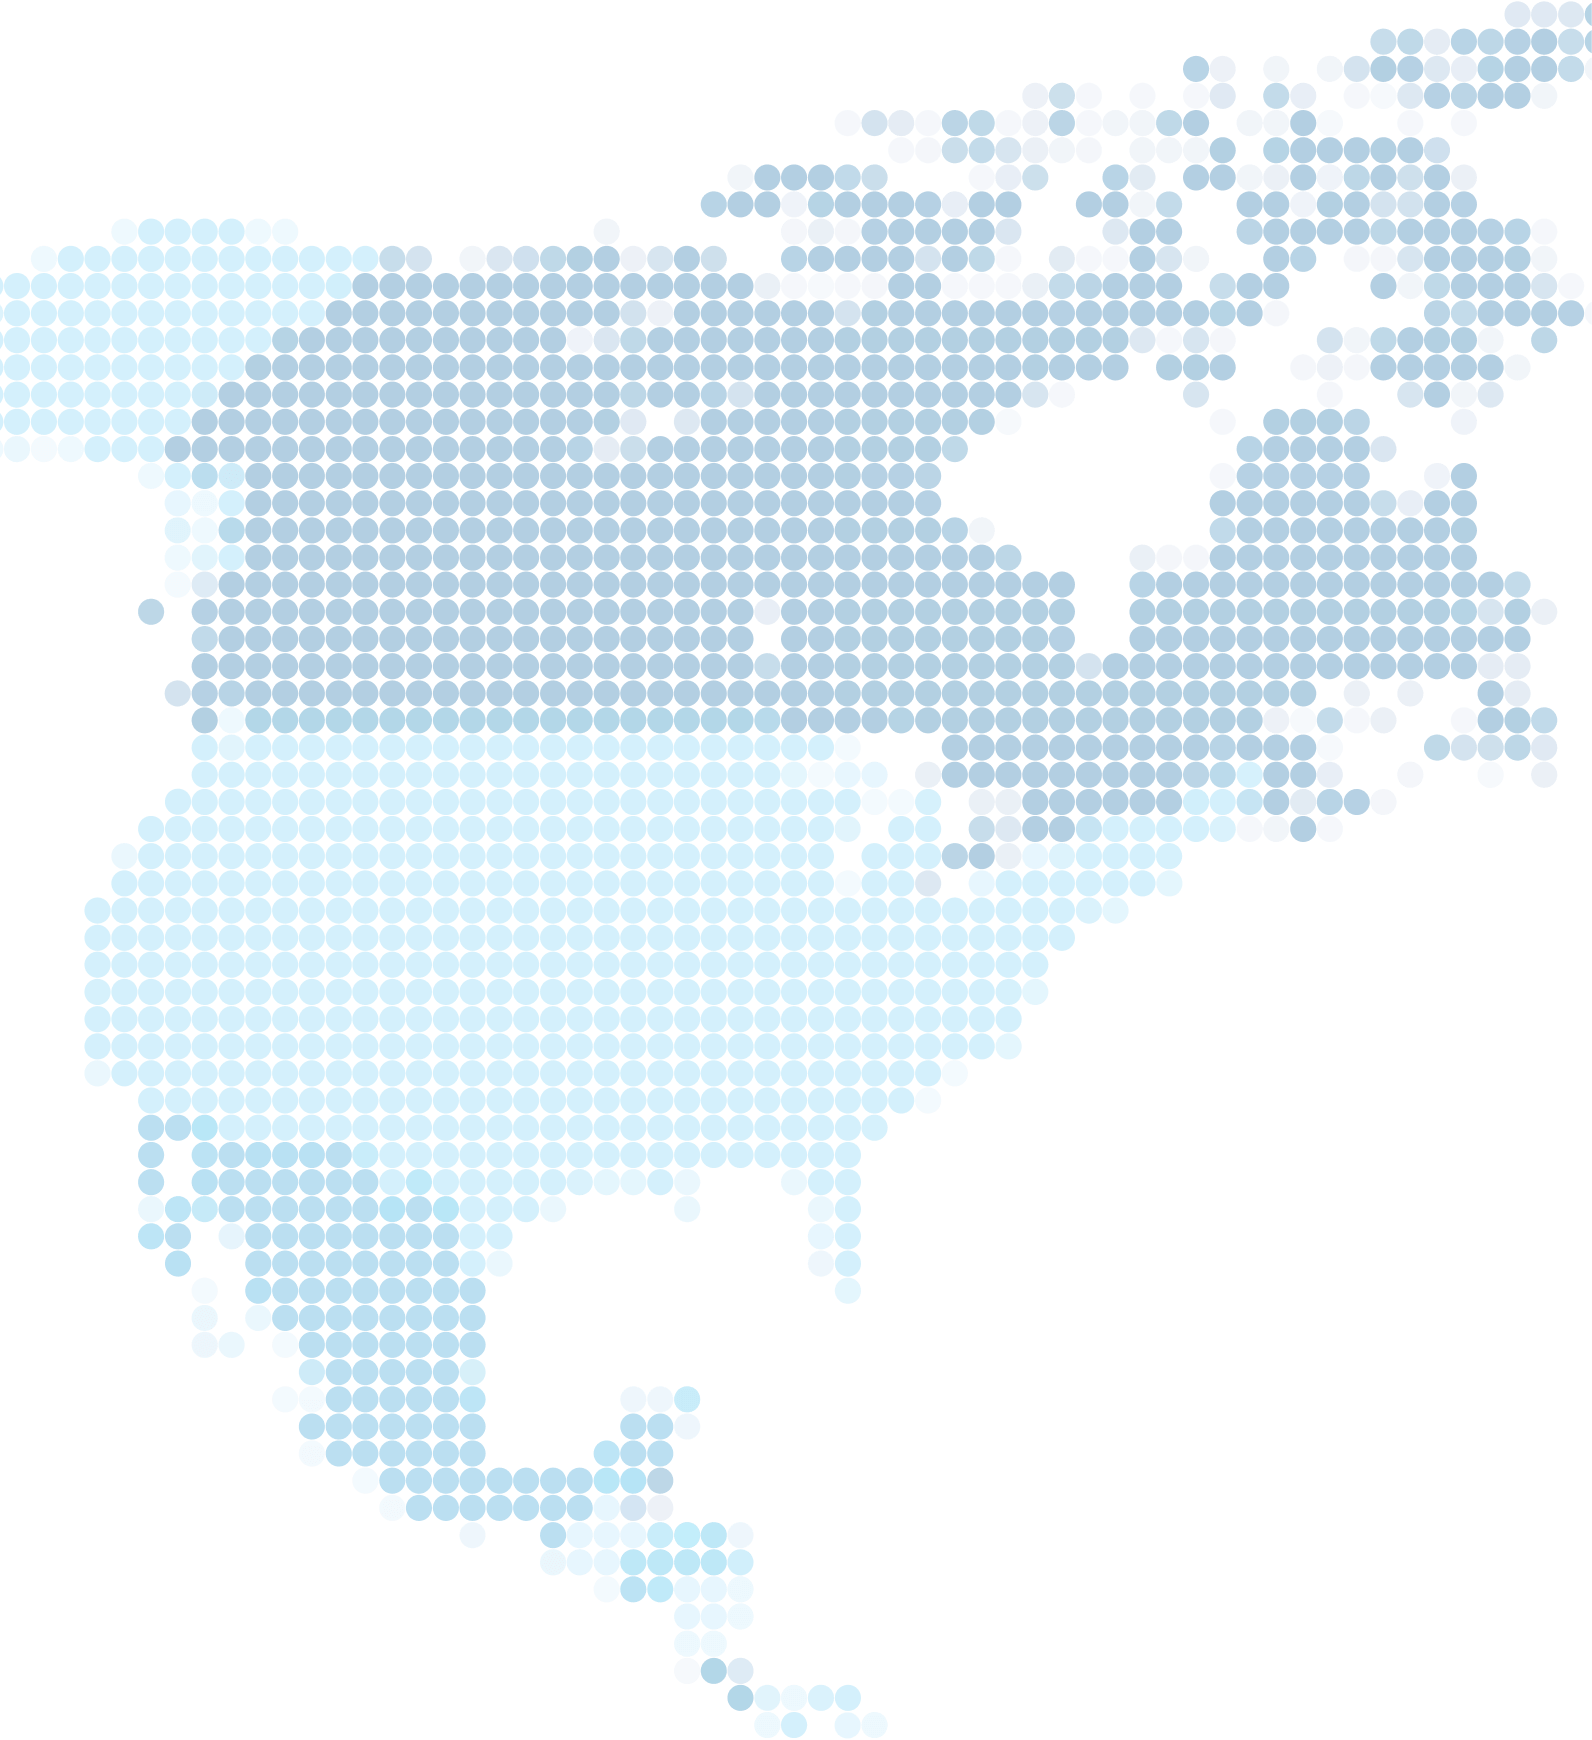 pixellated map of north america